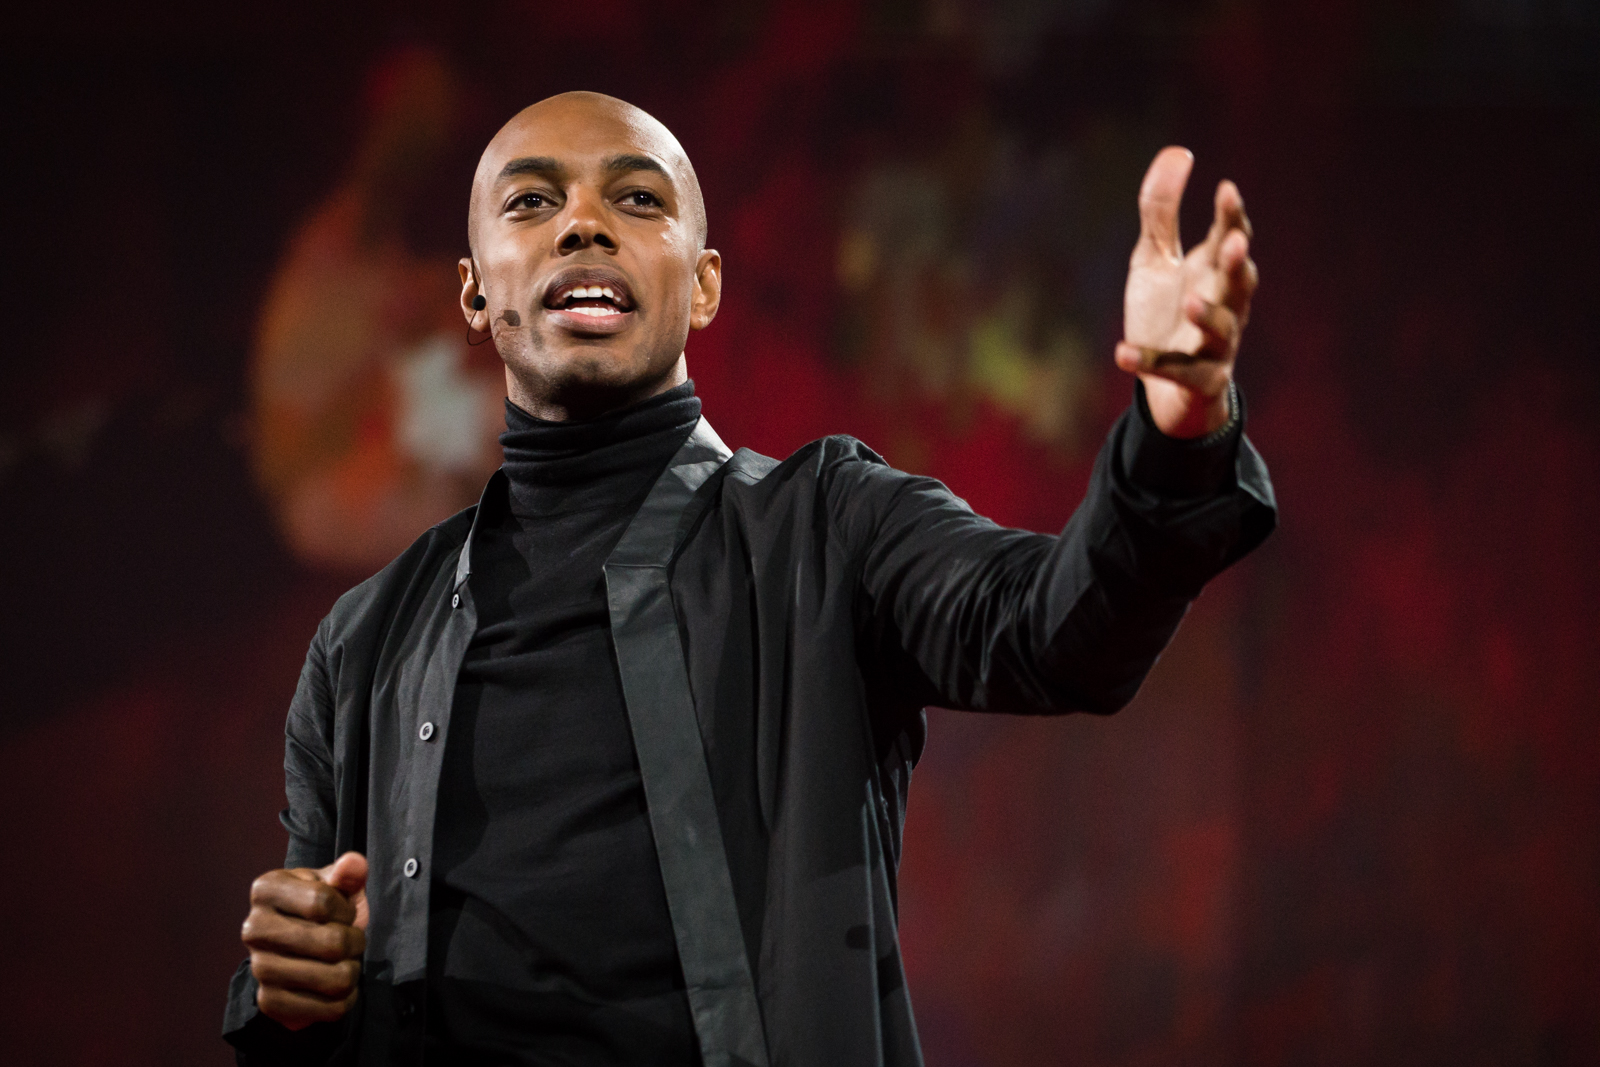 Casey Gerald speaks at TED2016 - Dream, February 15-19, 2016, Vancouver Convention Center, Vancouver, Canada. Photo: Bret Hartman / TED